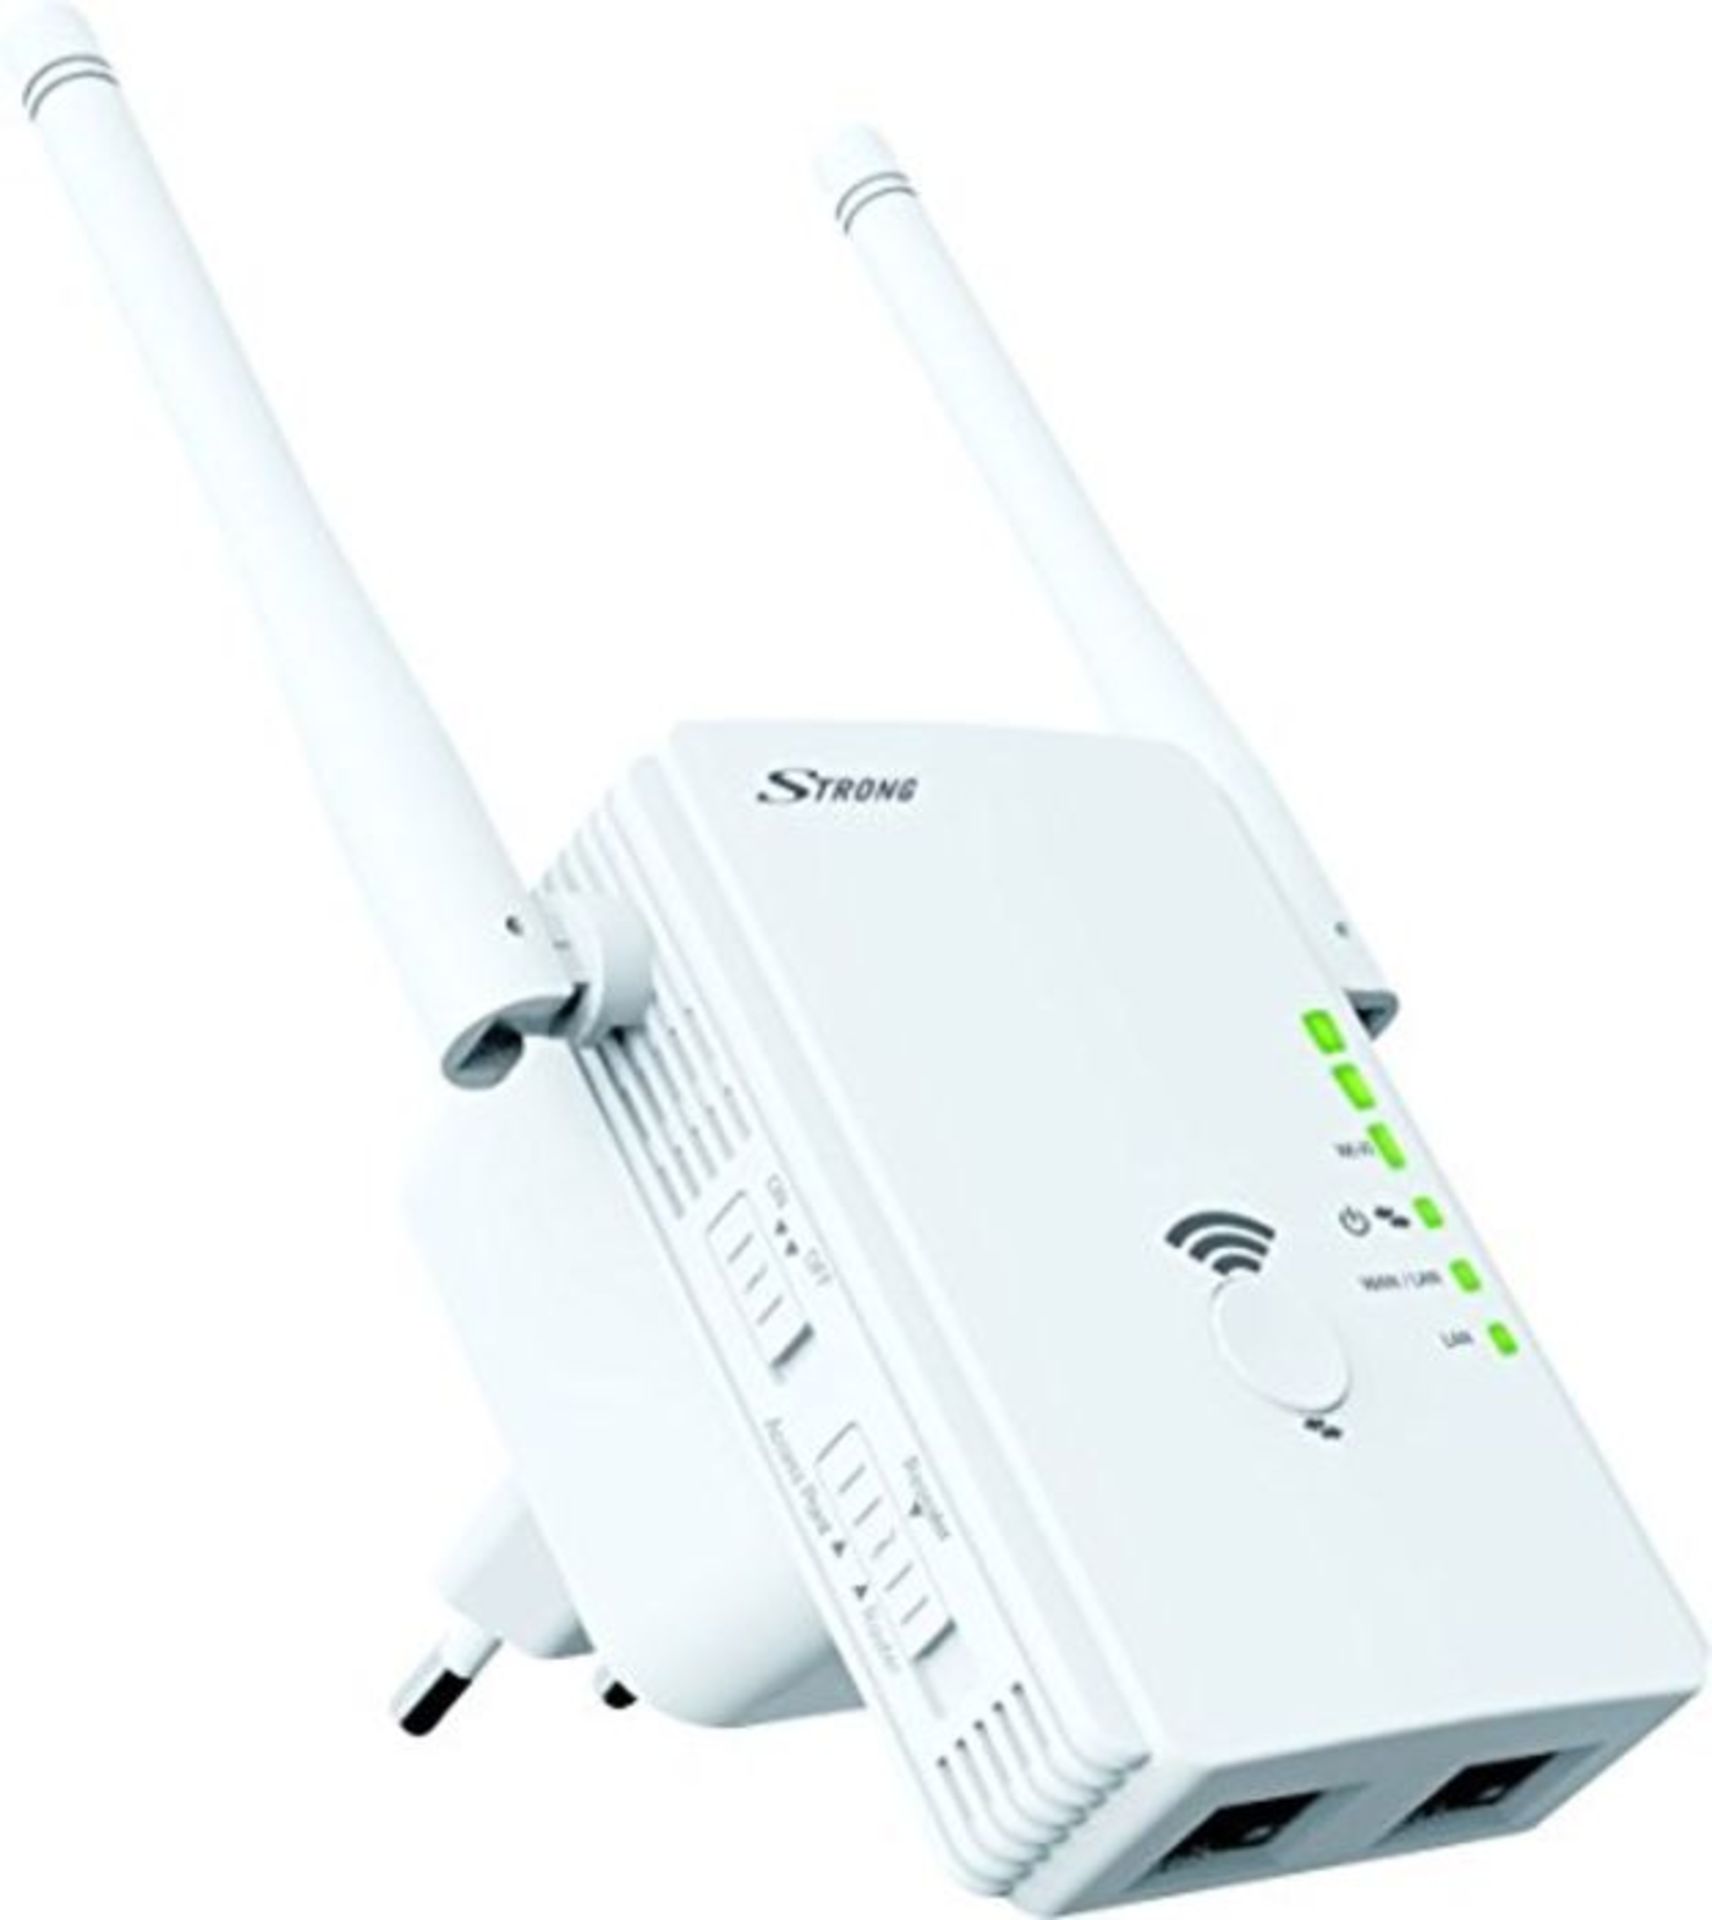 STRONG WLAN Repeater 300 V2, Betriebsmodi: Universal Repeater/Access Point/Router, 300